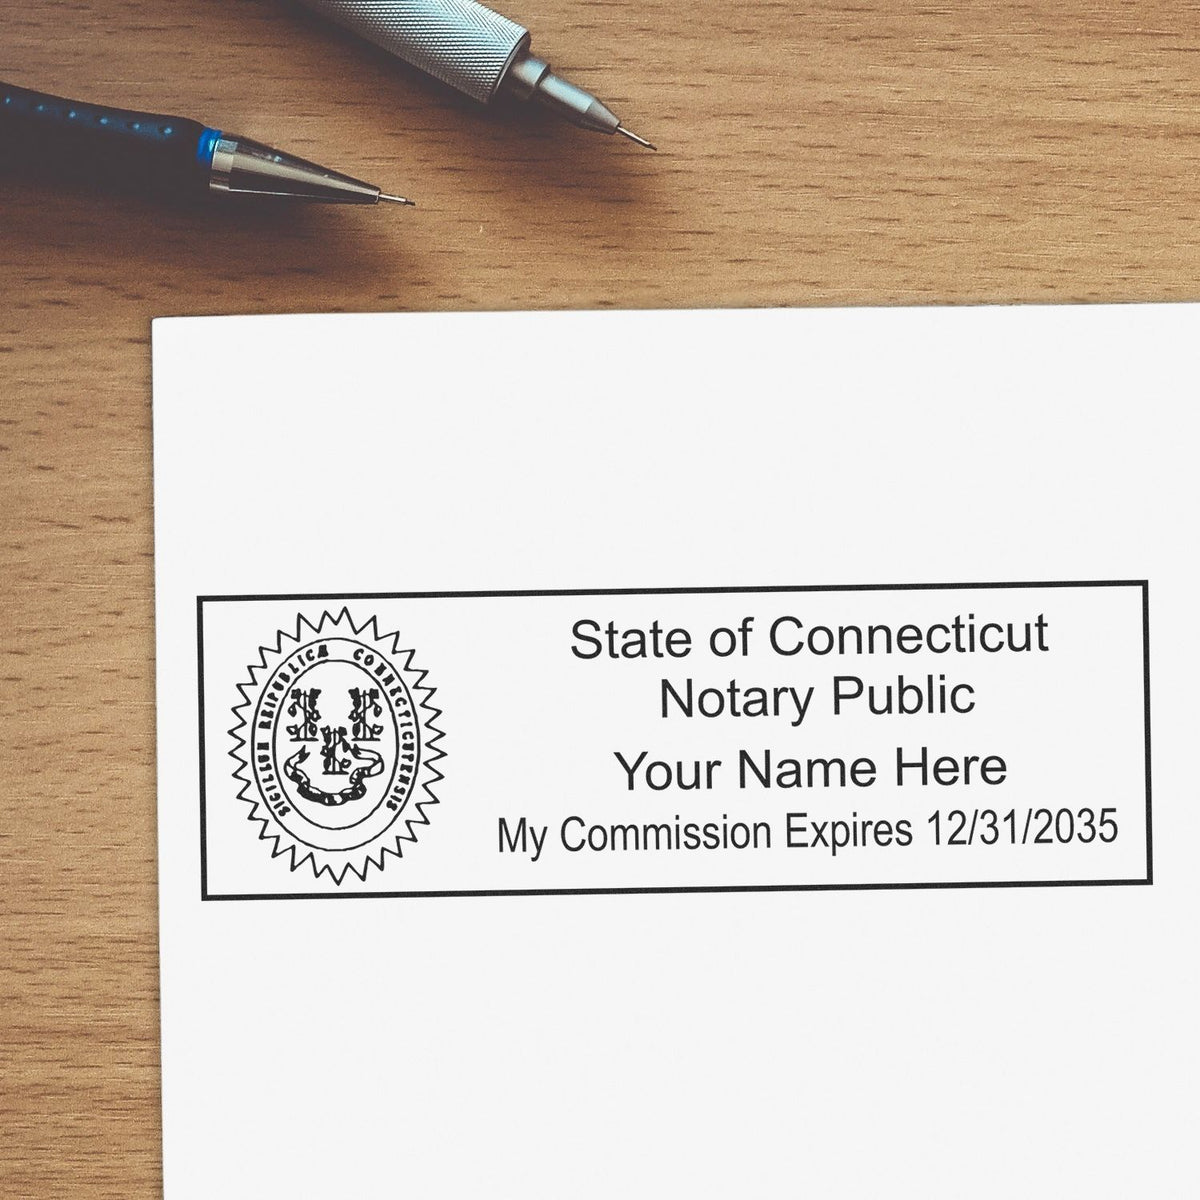 A lifestyle photo showing a stamped image of the Heavy-Duty Connecticut Rectangular Notary Stamp on a piece of paper